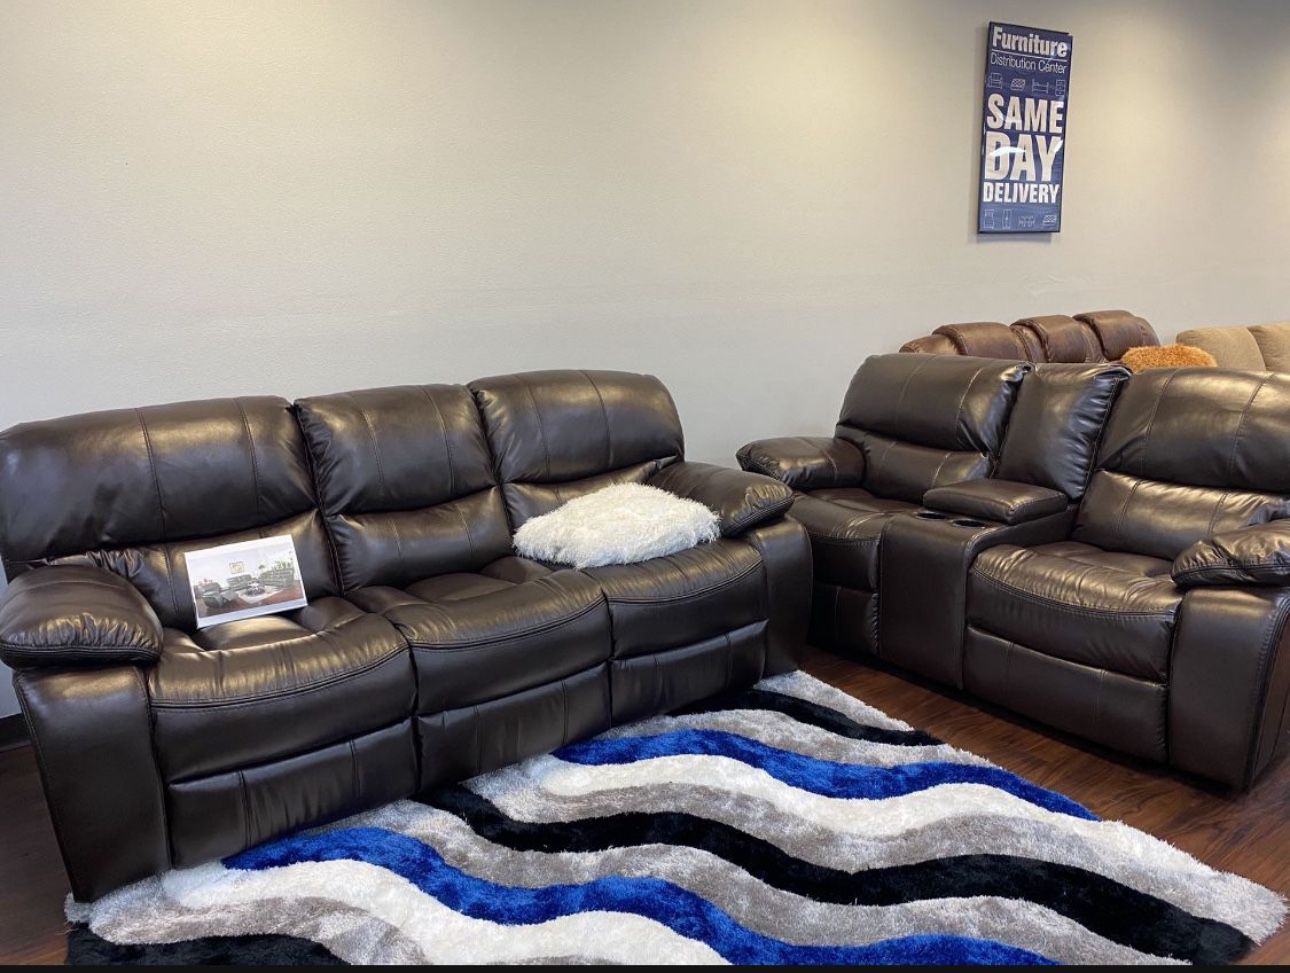 MEMORIAL DAY SALE!! COMFY NEW MADRID RECLINING SOFA AND LOVESEAT SET ON SALE ONLY $899. IN STOCK SAME DAY DELIVERY 🚚 EASY FINANCING 